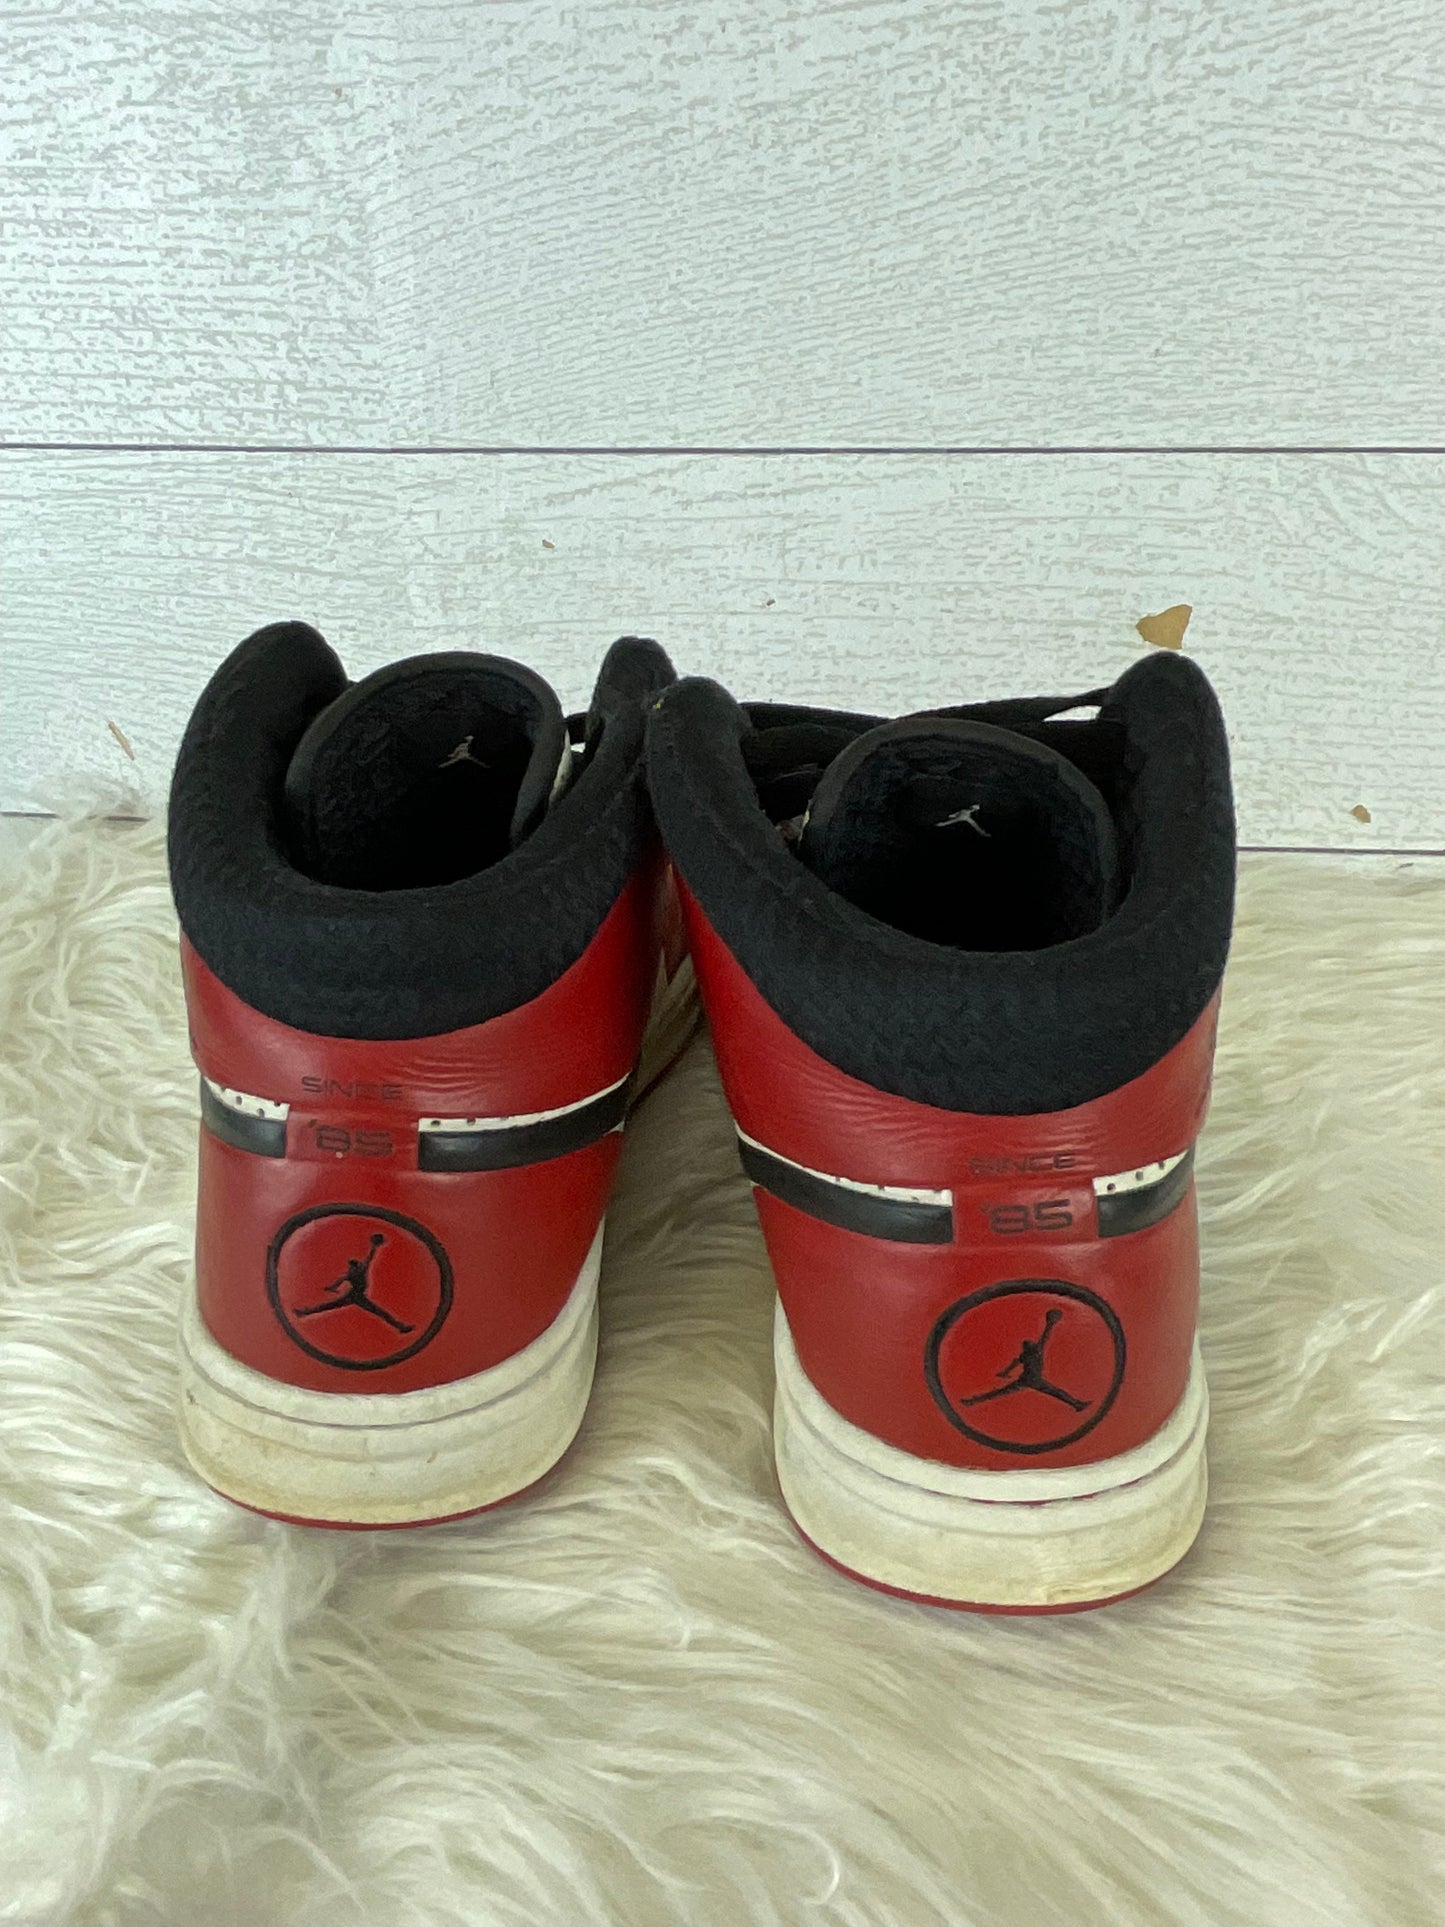 Shoes Sneakers By Nike  Size: 8